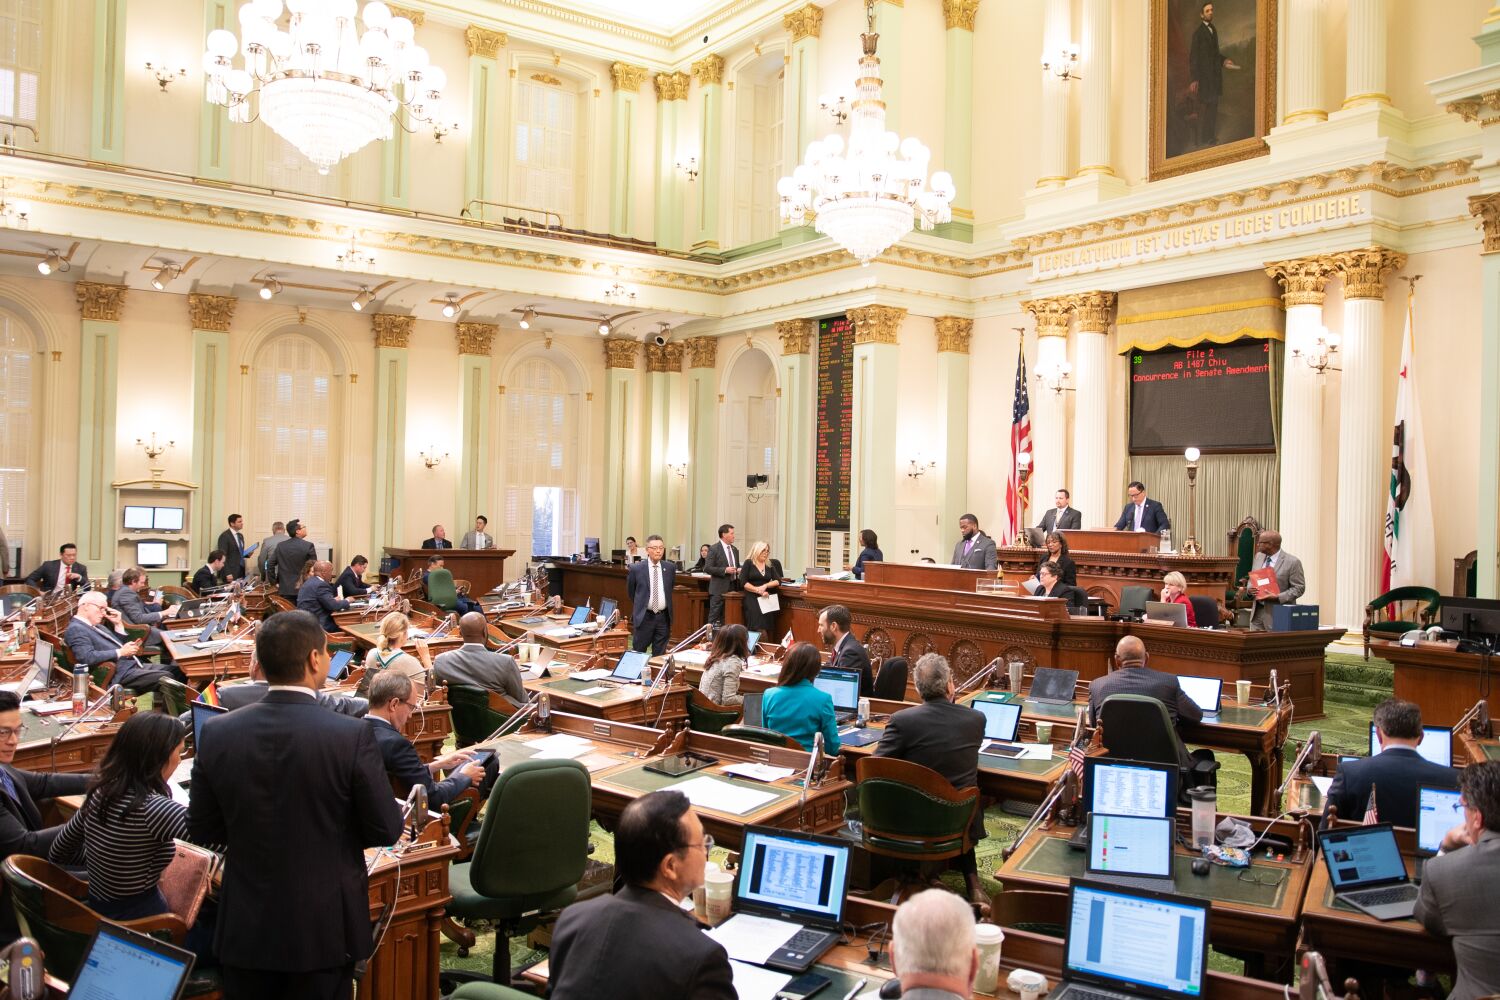 Takeaways from the California budget deal between Newsom and Democratic lawmakers